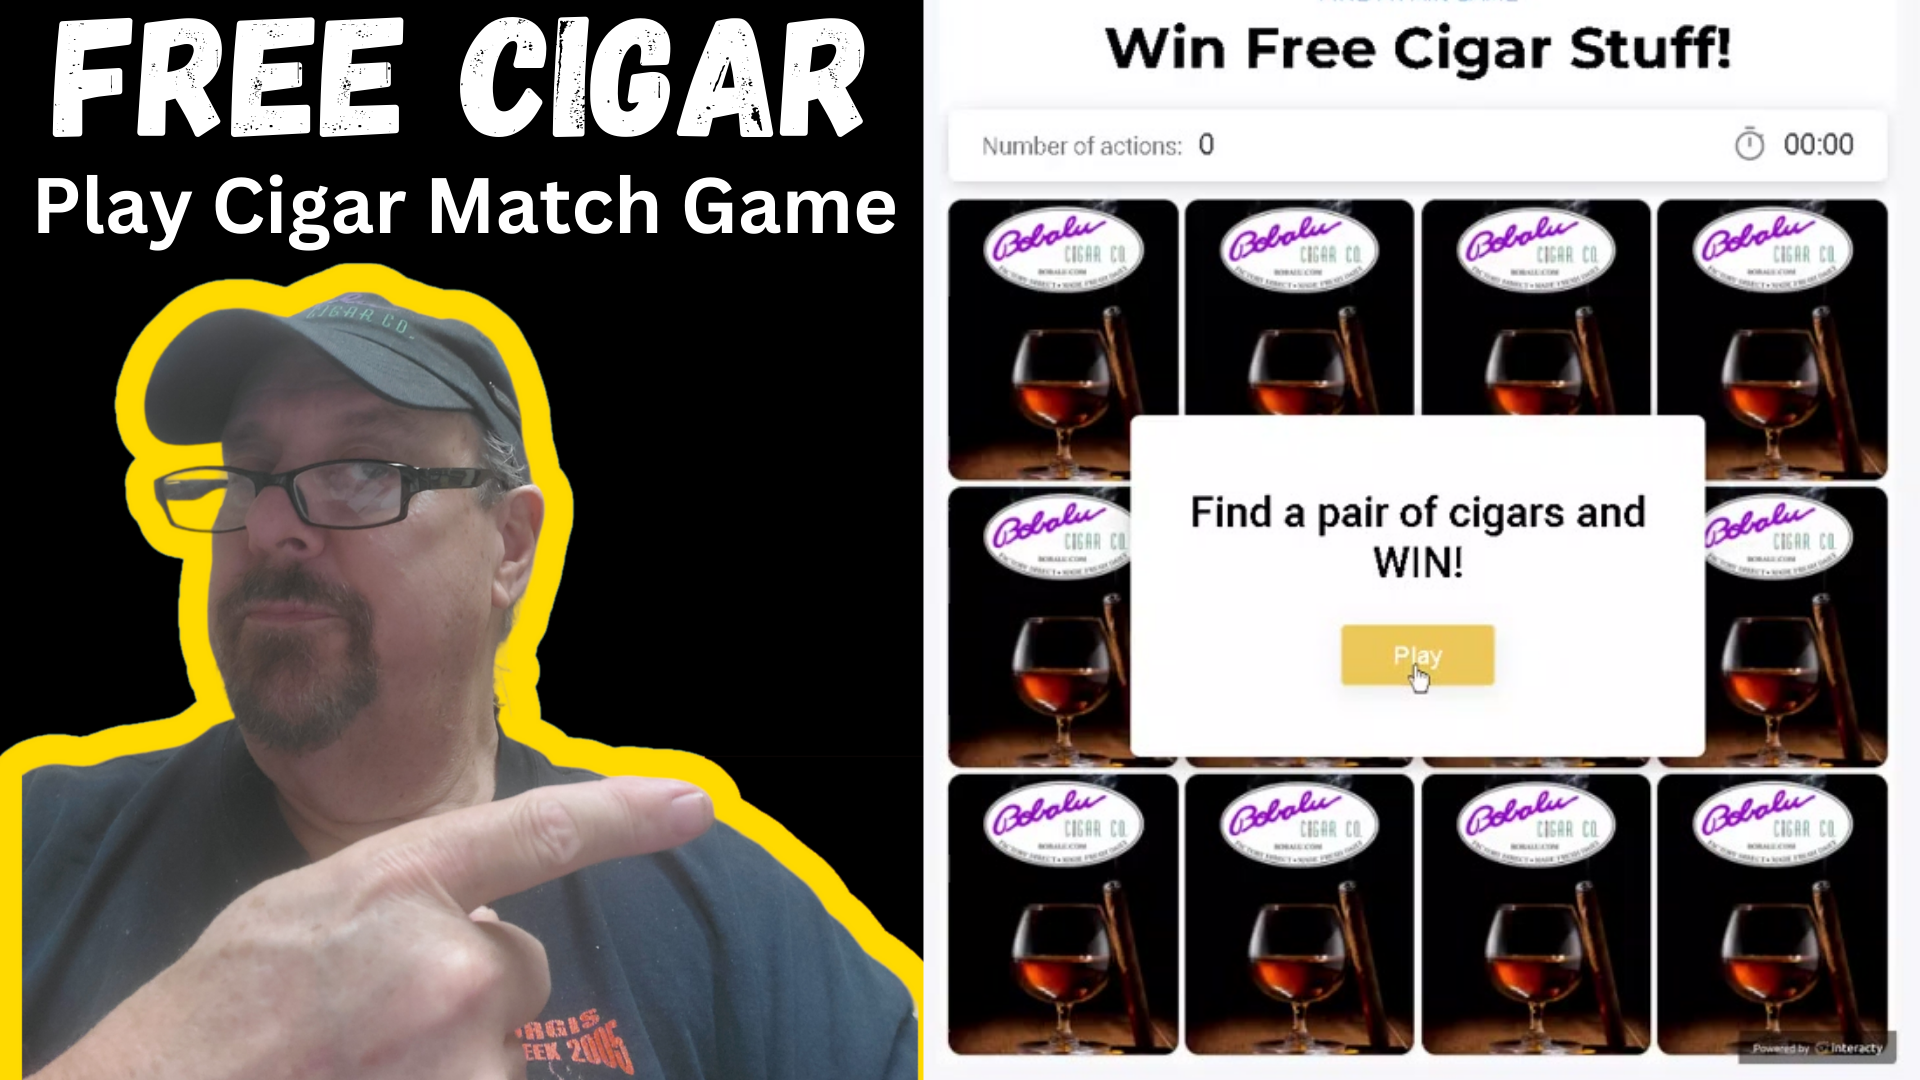 Play cigar match game and win free cigars